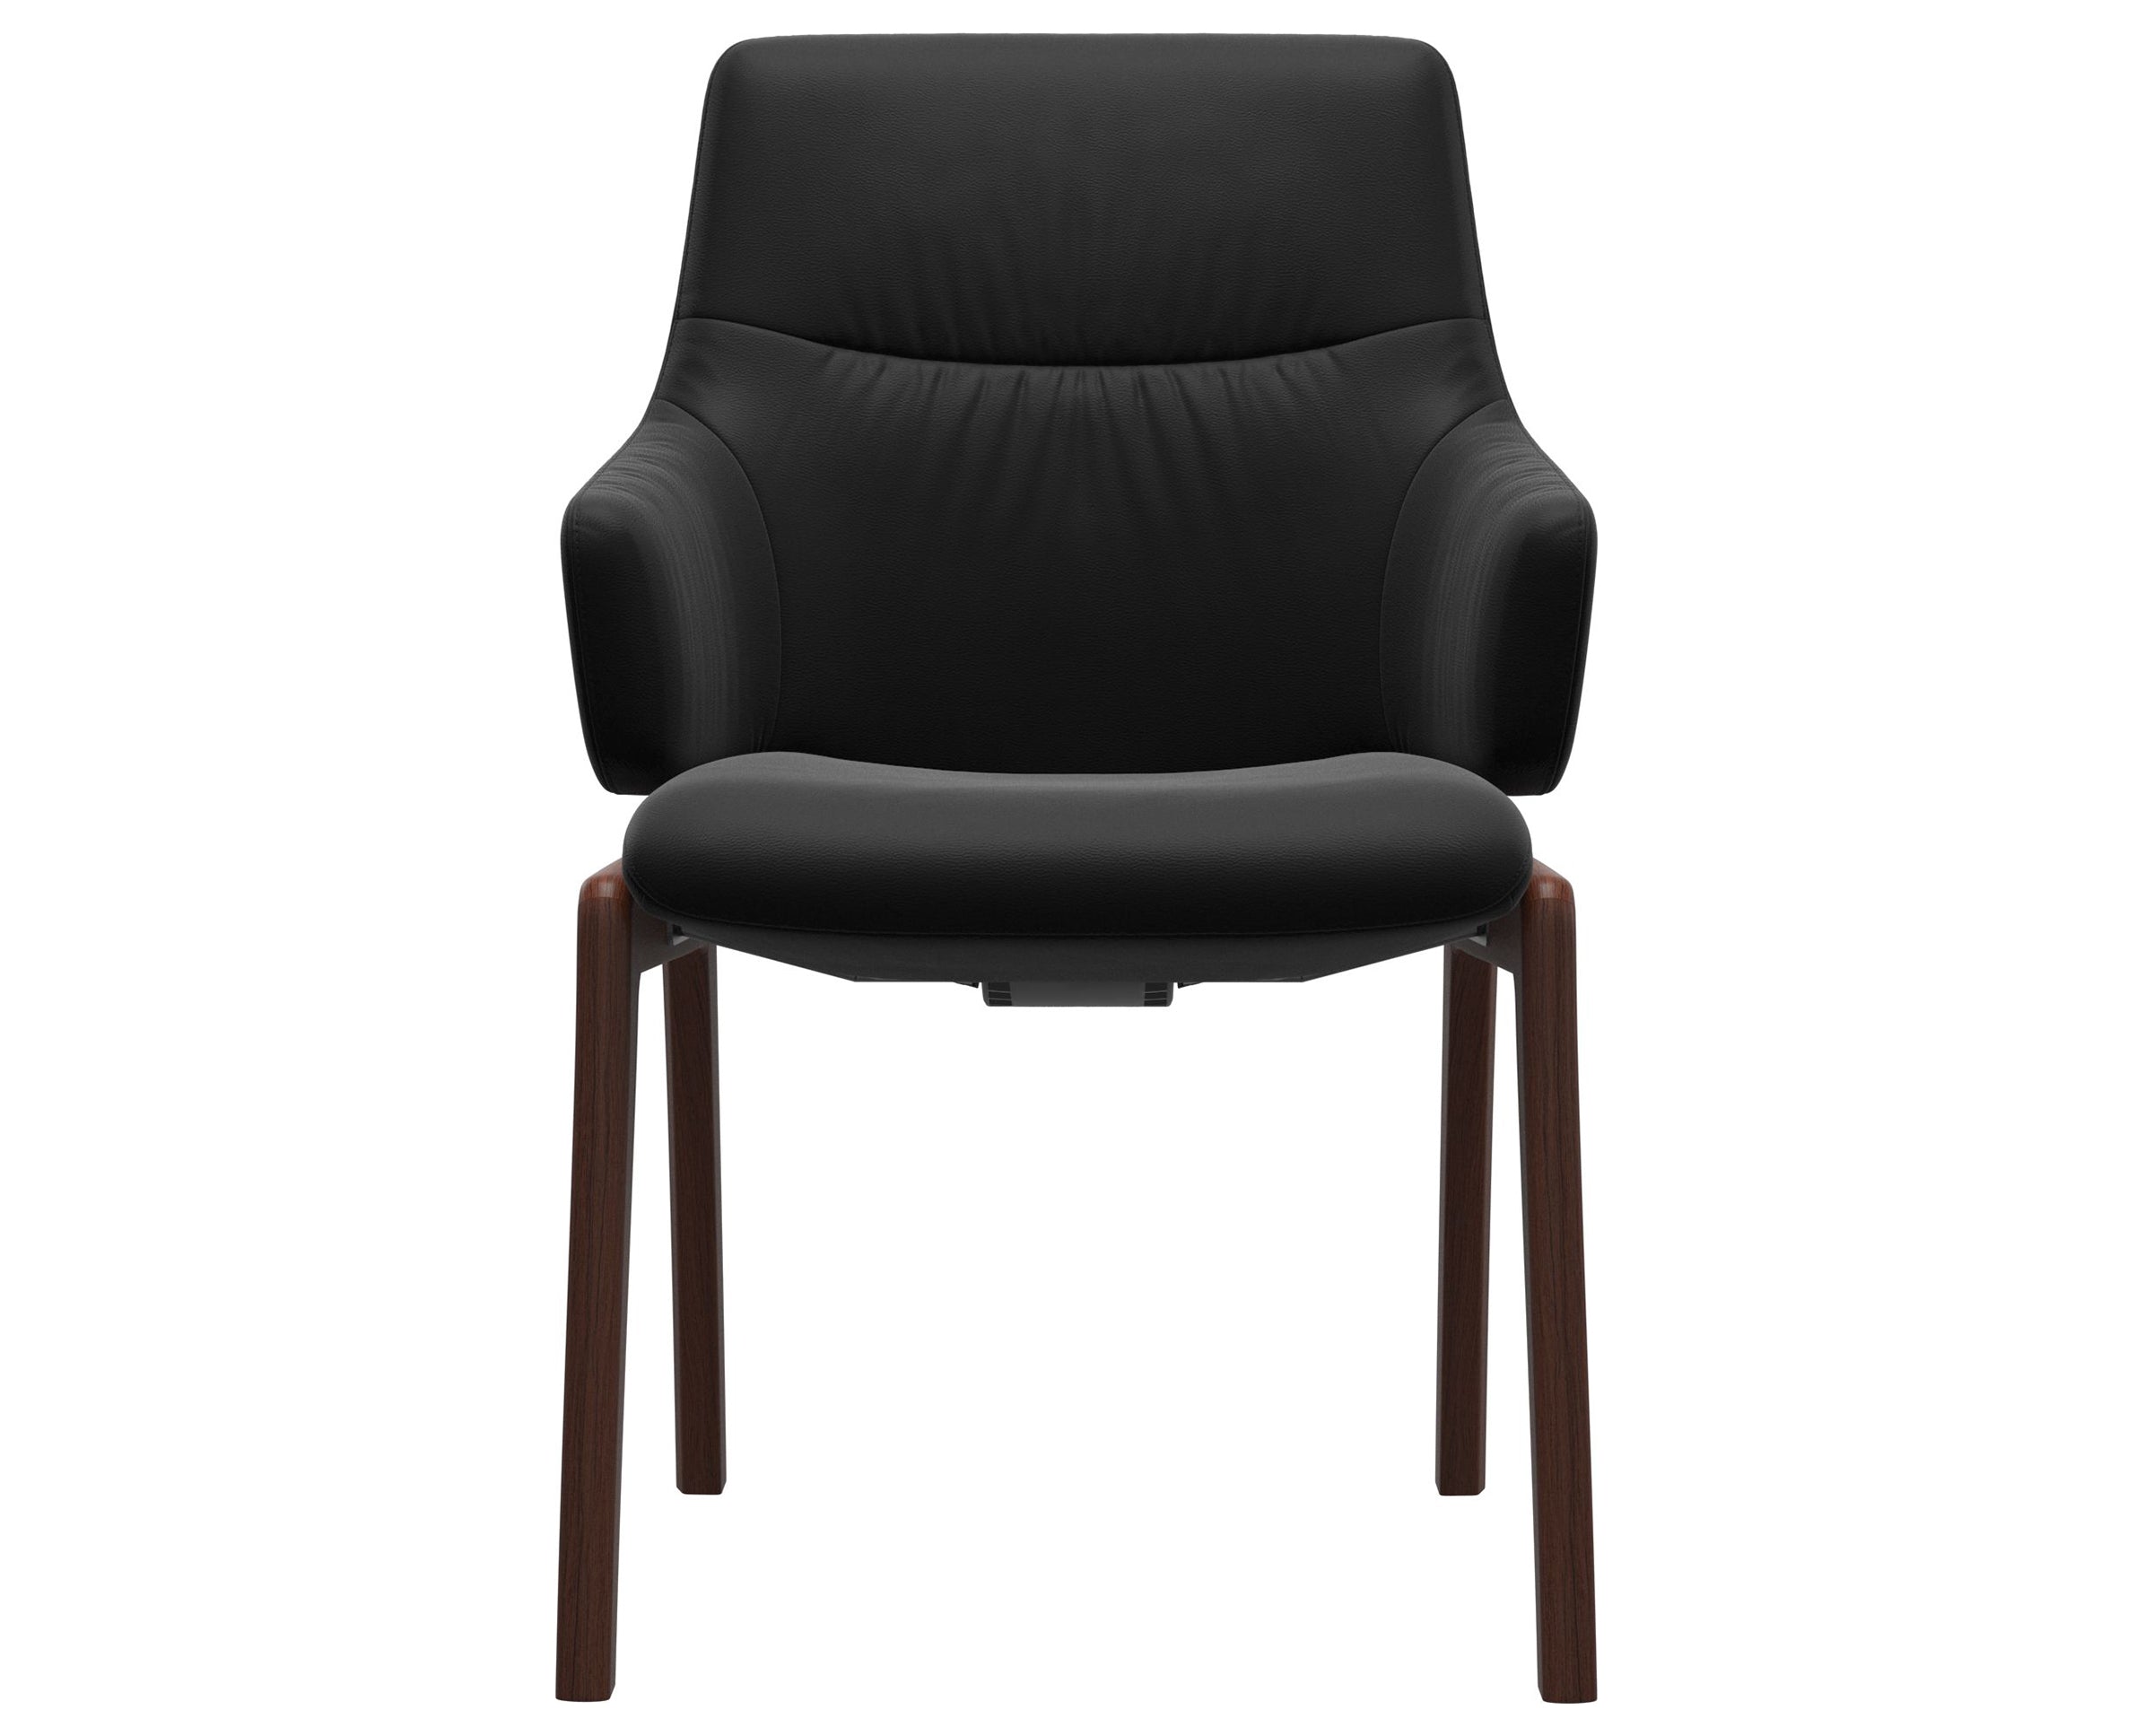 Paloma Leather Black and Walnut Base | Stressless Mint Low Back D100 Dining Chair w/Arms | Valley Ridge Furniture